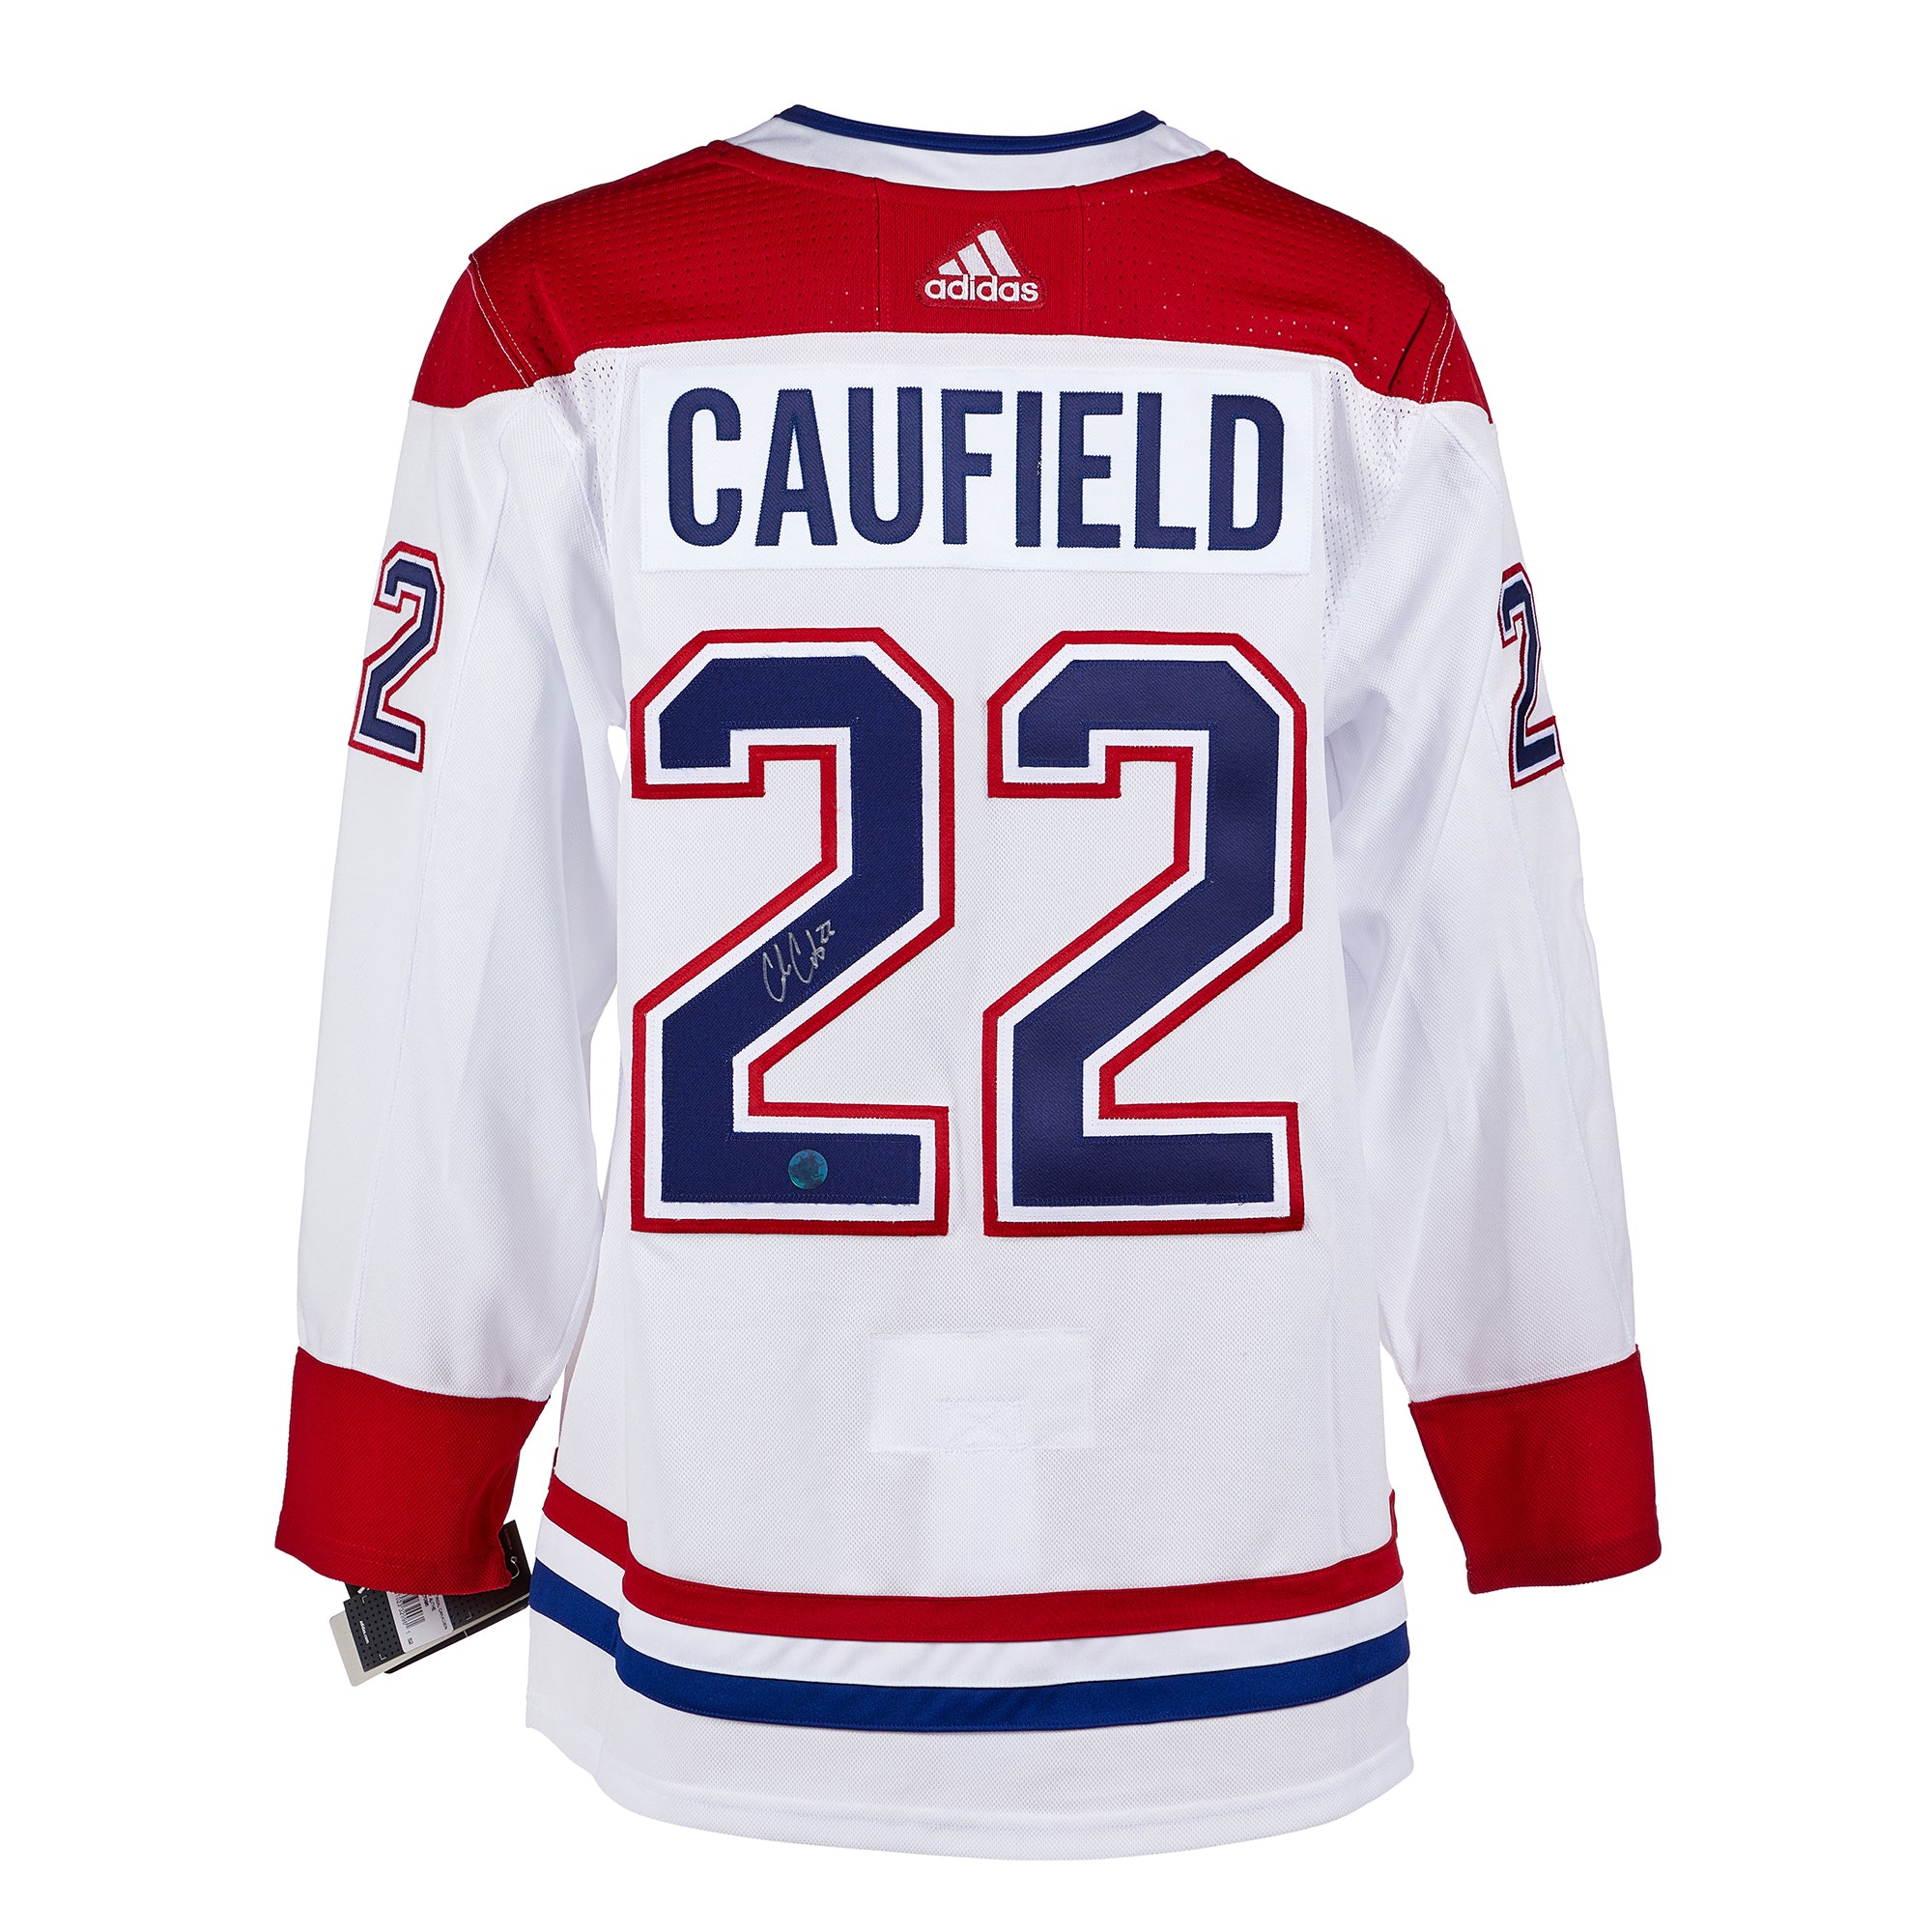 NHL Men's Montreal Canadiens Cole Caufield #22 Red T-Shirt, XXL